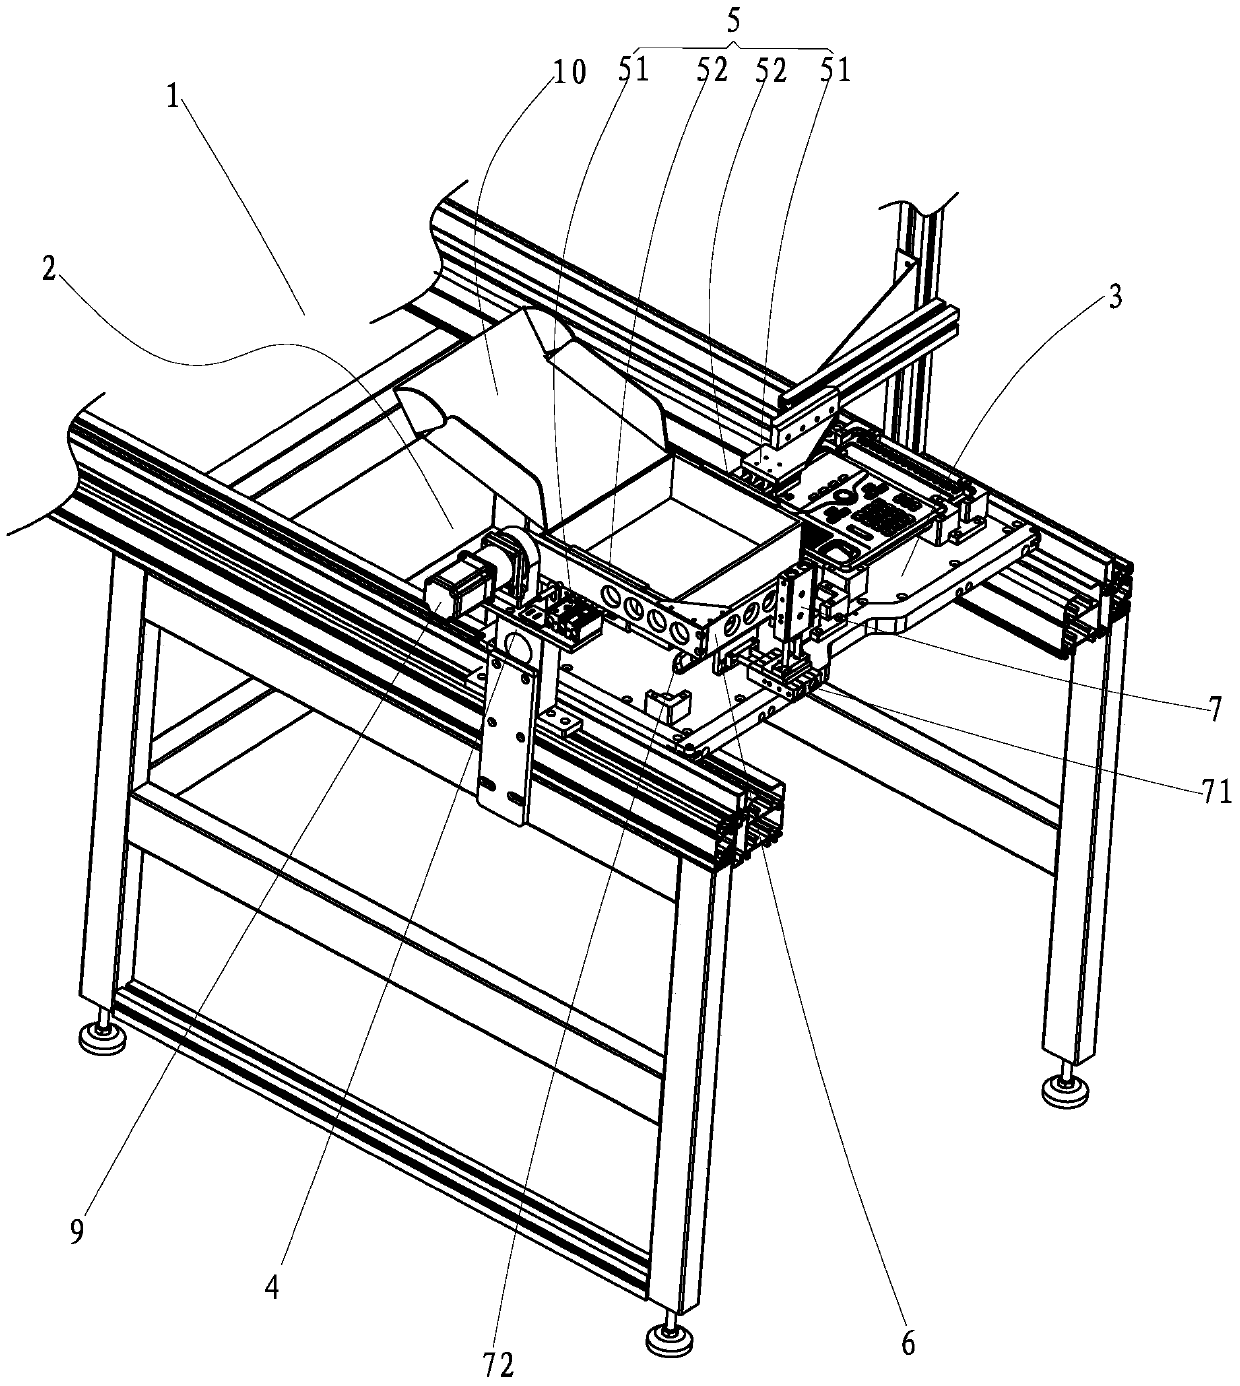 A device for automatically opening a packing box